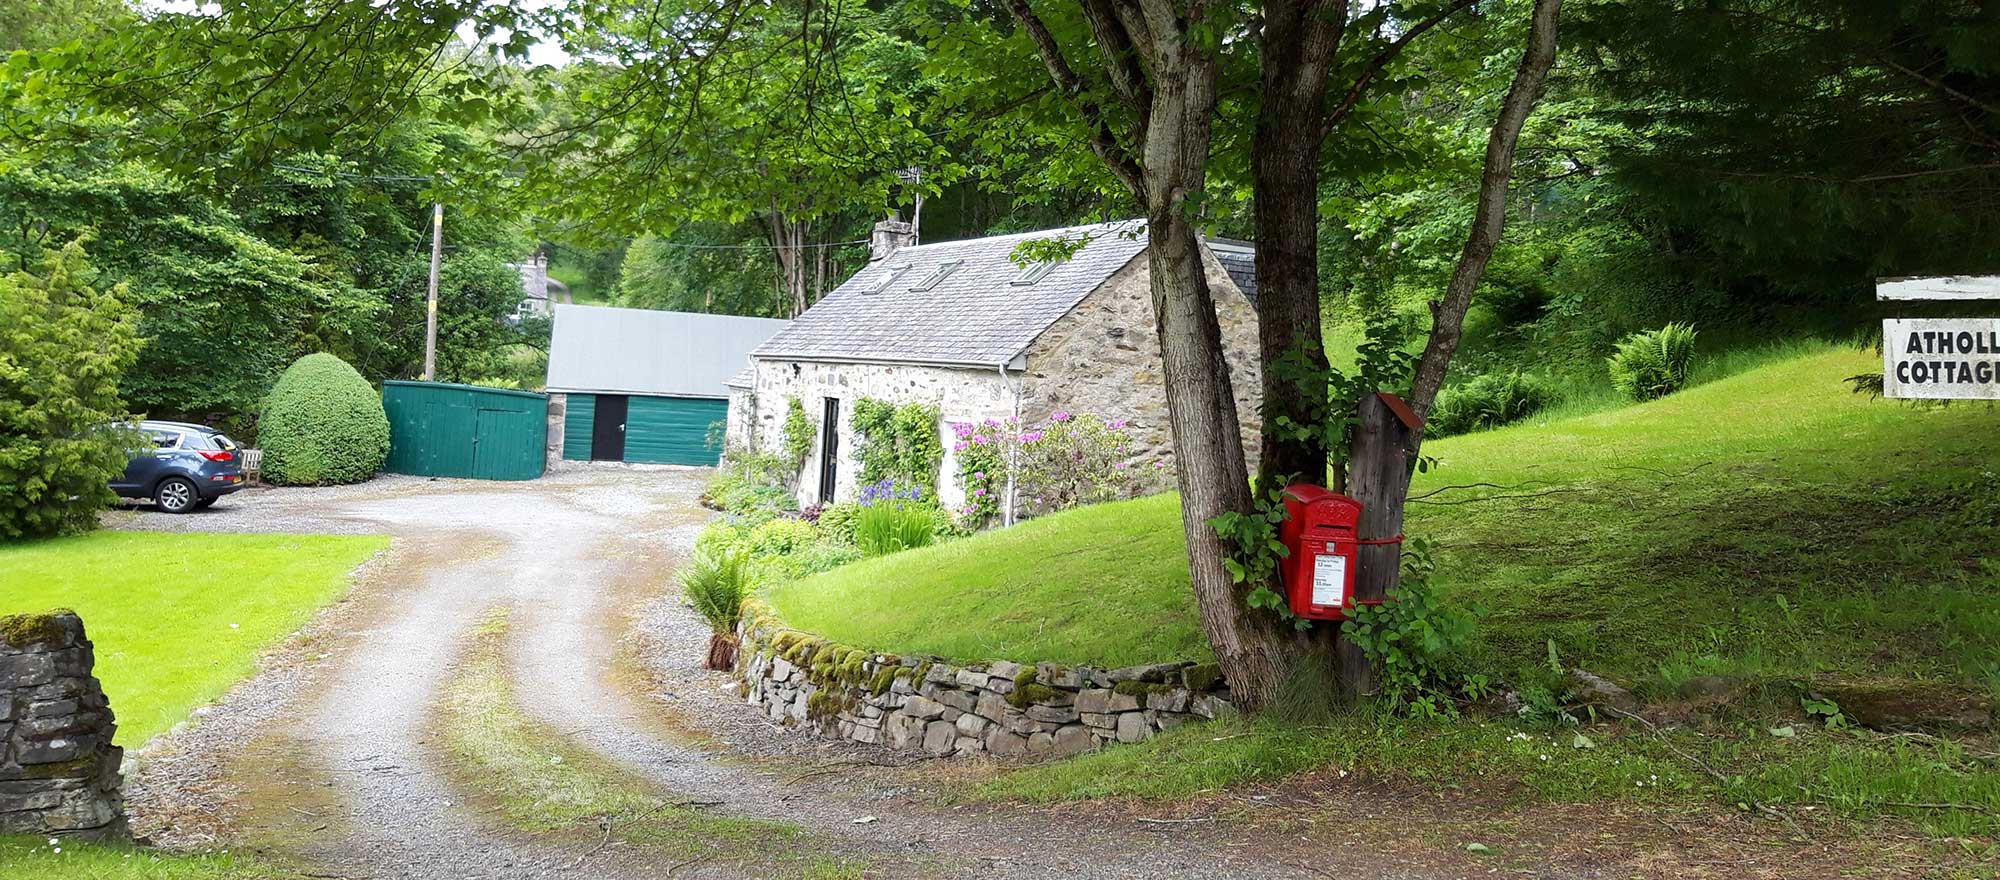 Atholl Cottage beautiful self
	 catering accommodation near Pitlochry in the heart of Perthshire